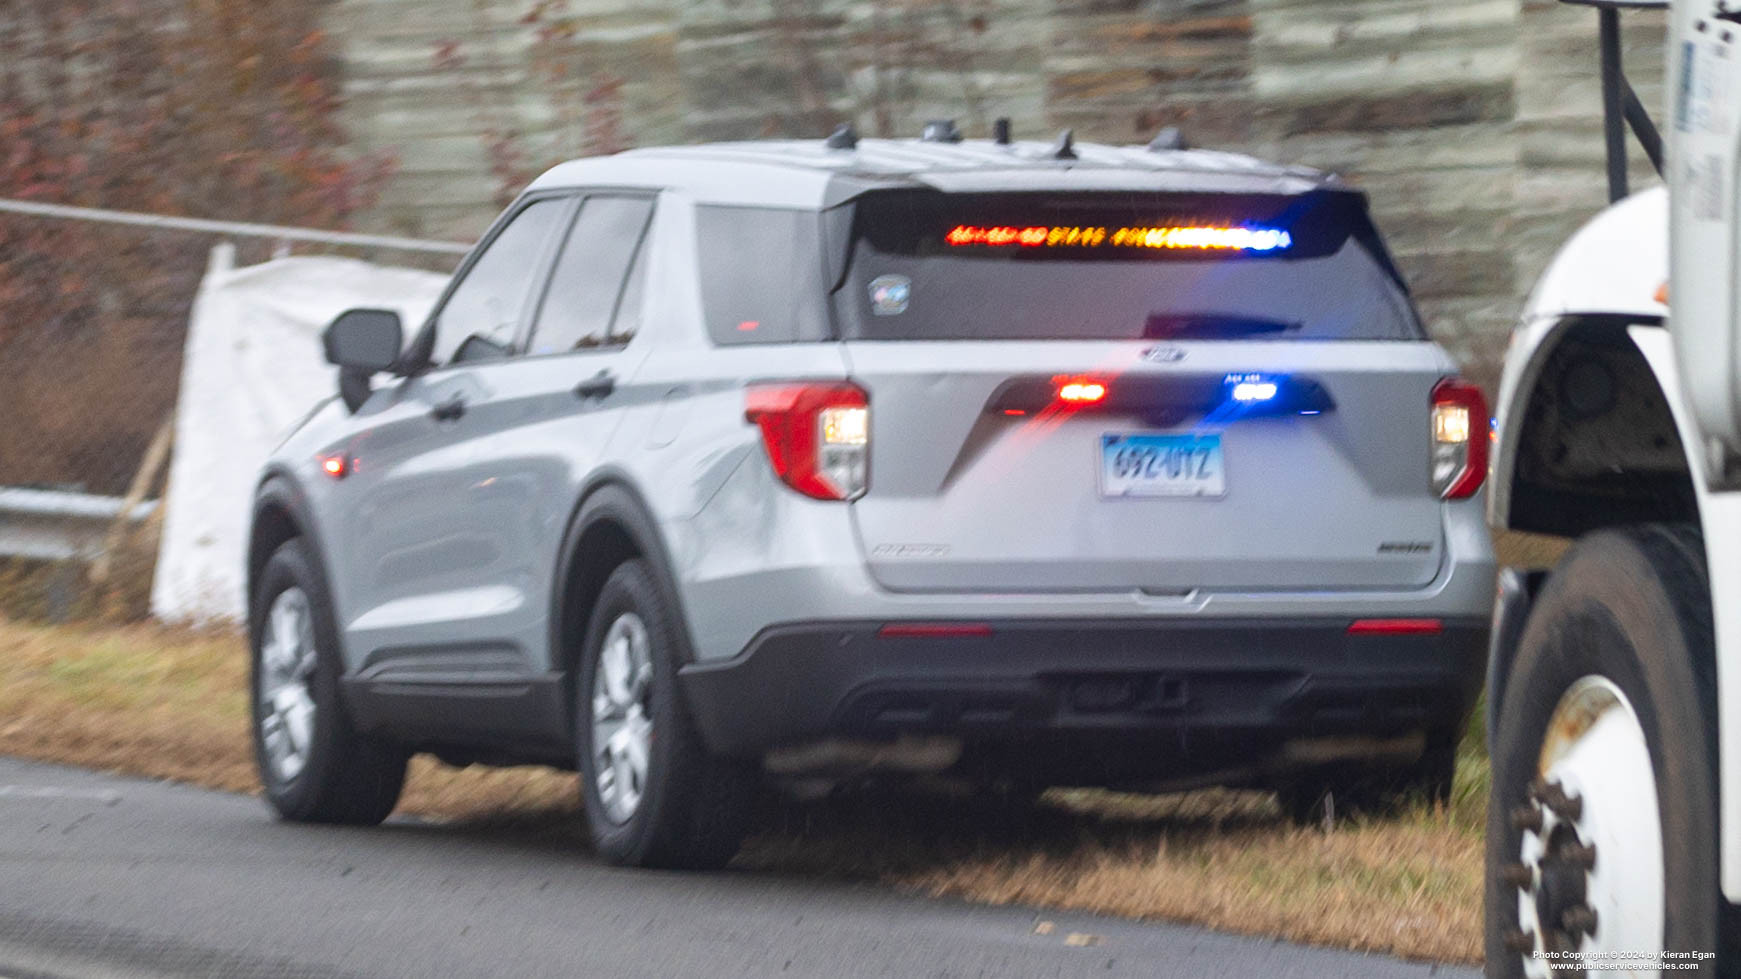 A photo  of Connecticut State Police
            Cruiser 692, a 2021-2022 Ford Police Interceptor Utility             taken by Kieran Egan